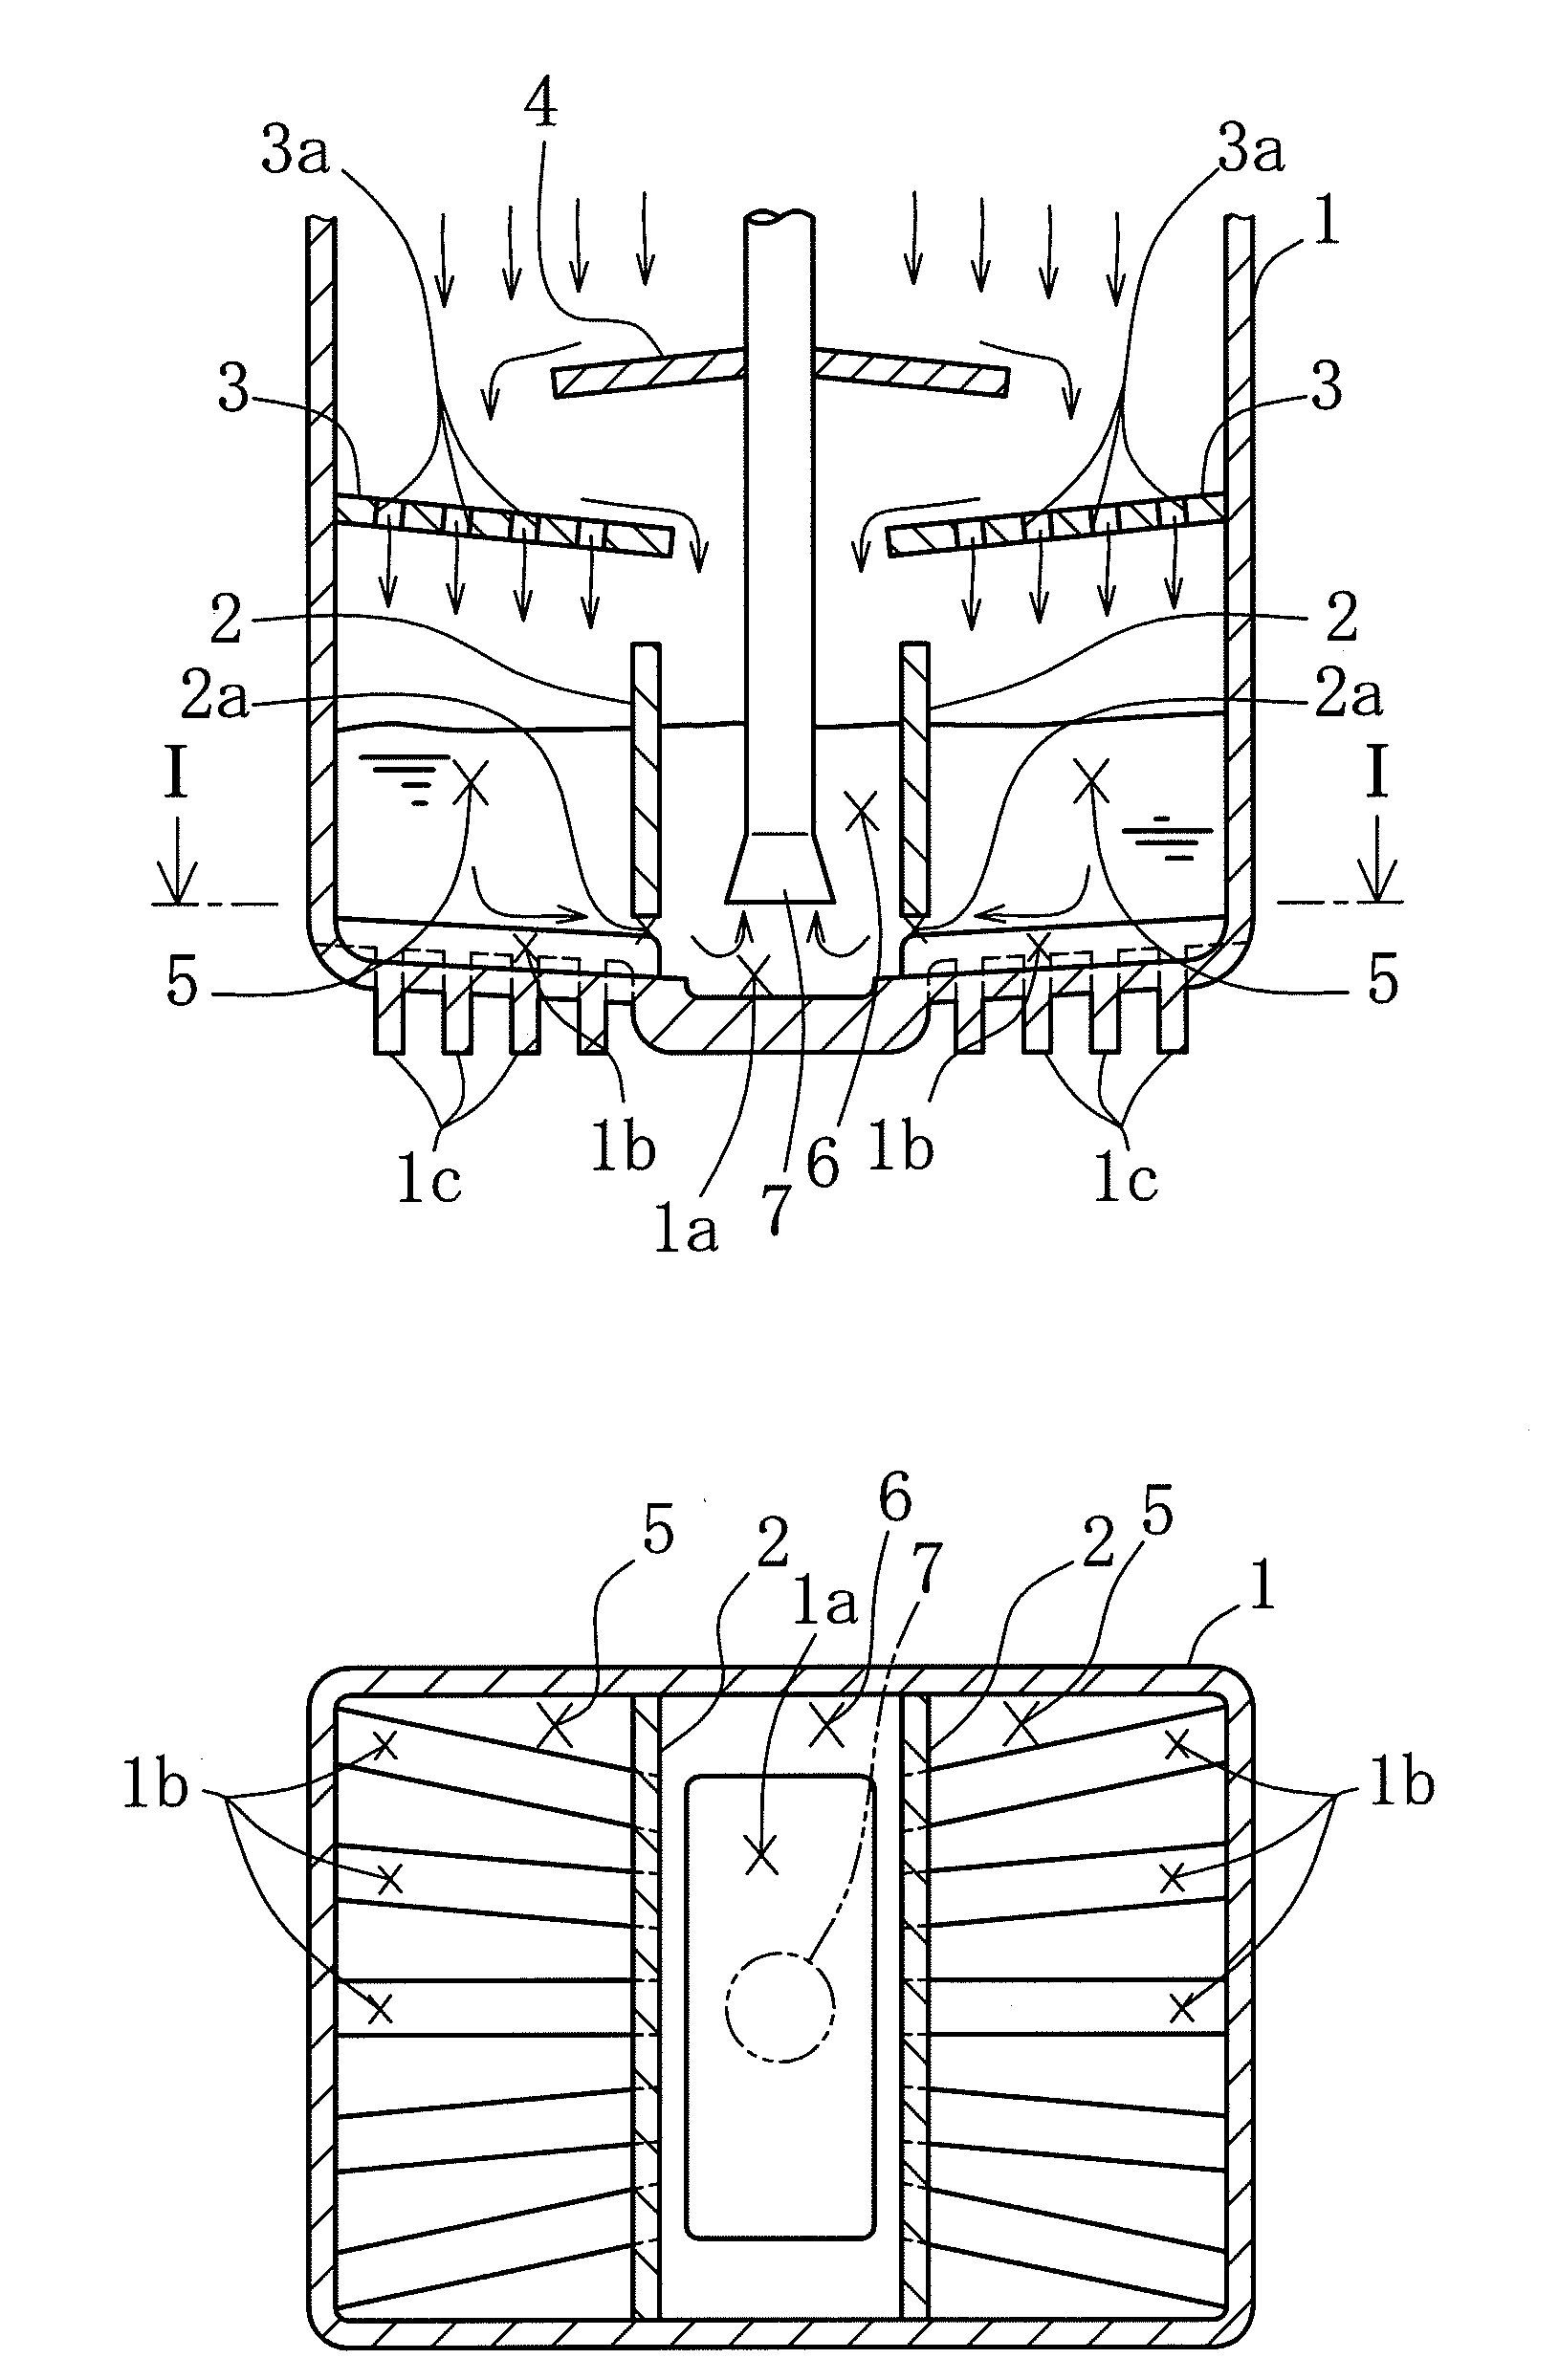 Oil pan structure